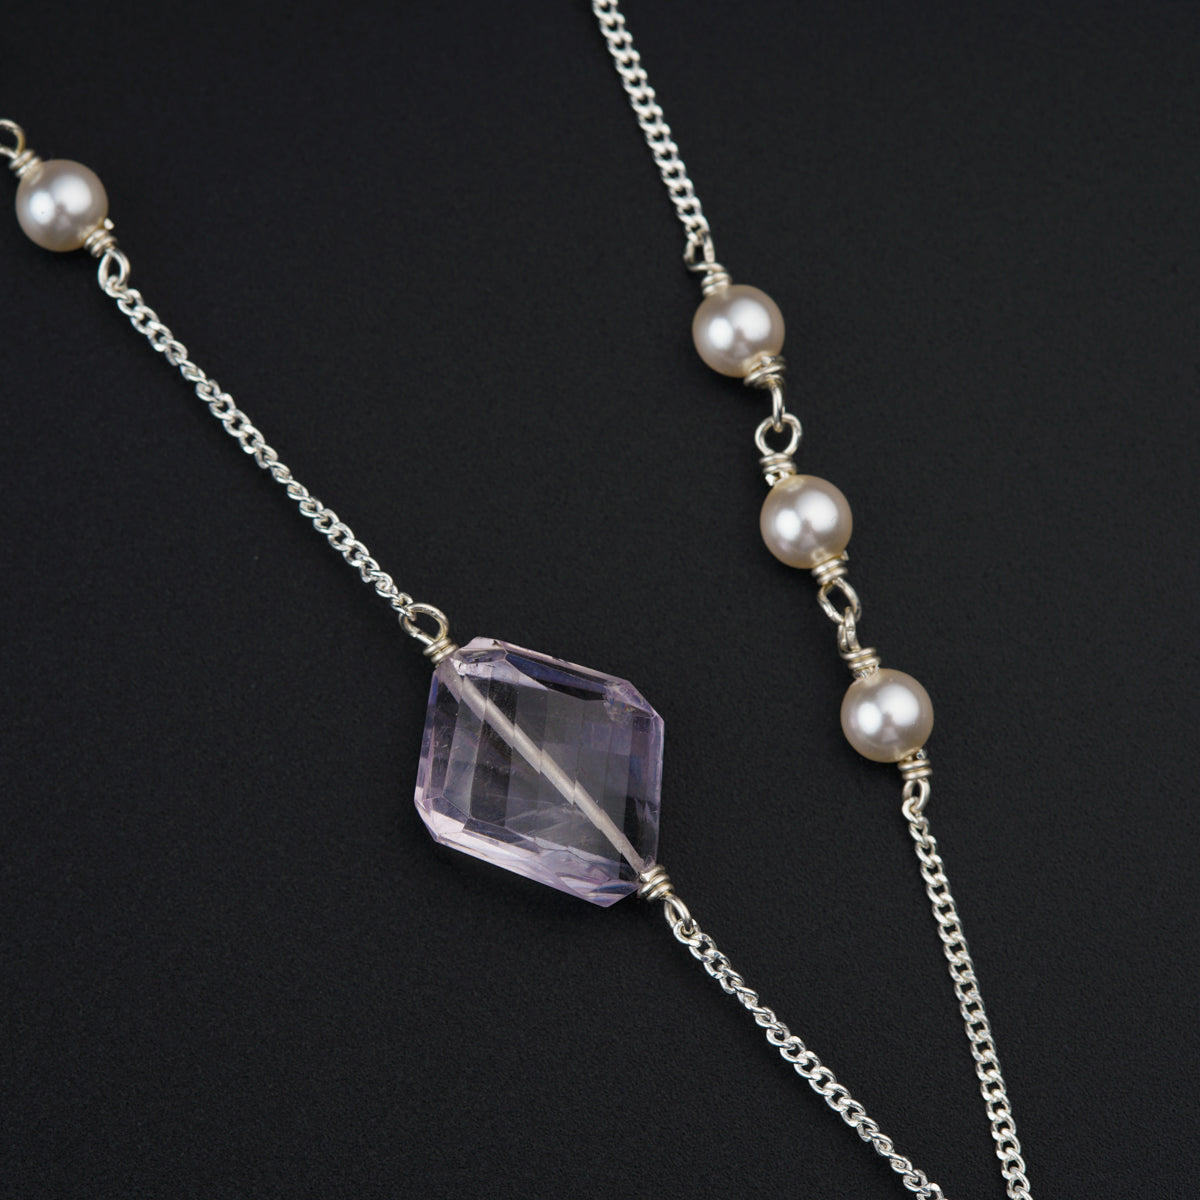 Silver Set with Amethyst stones and Pearls